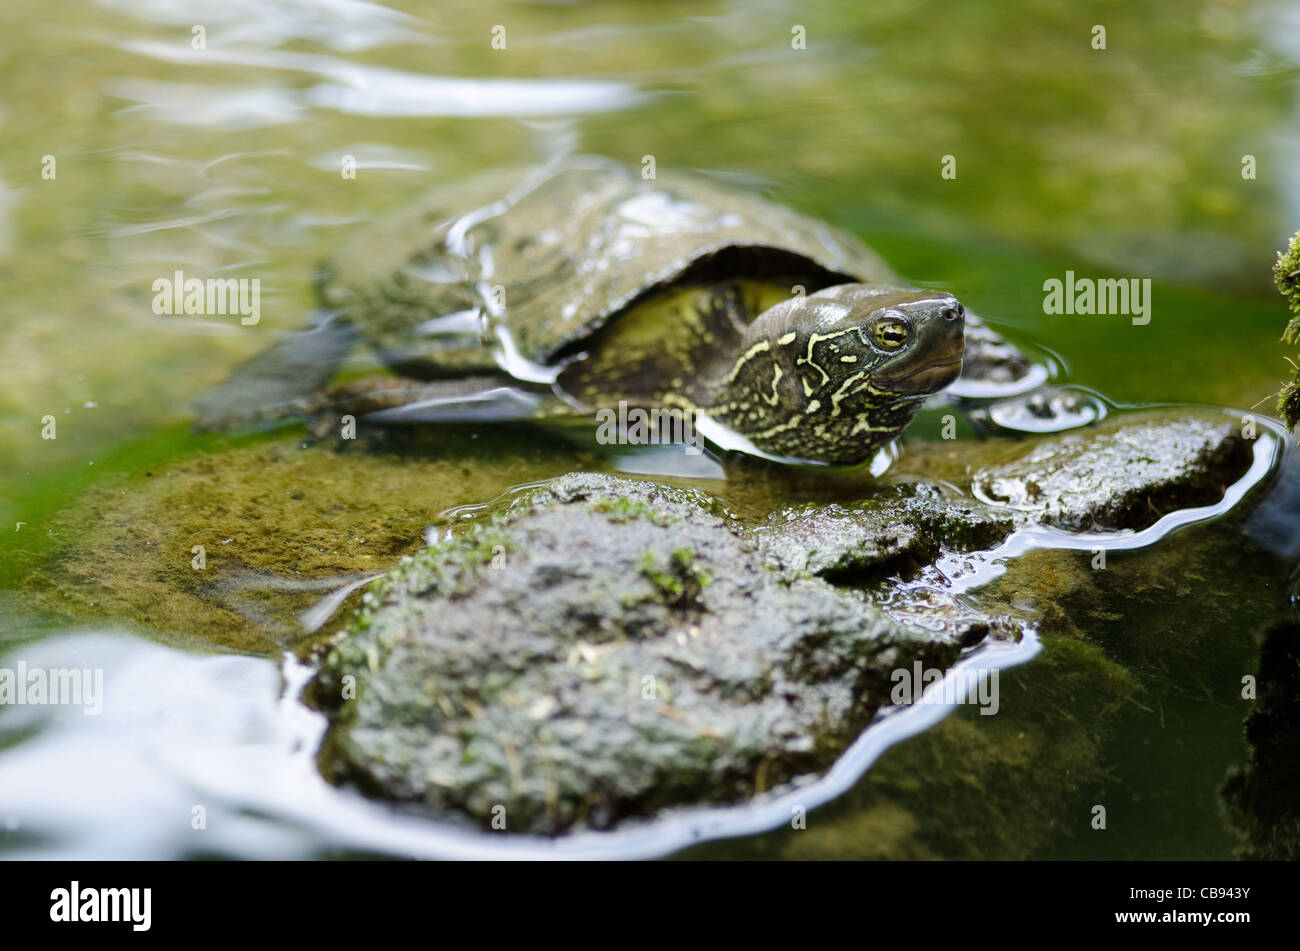 Chinese pond turtle sitting on a stone in water, Mauremys reevesii, an endangered species Stock Photo